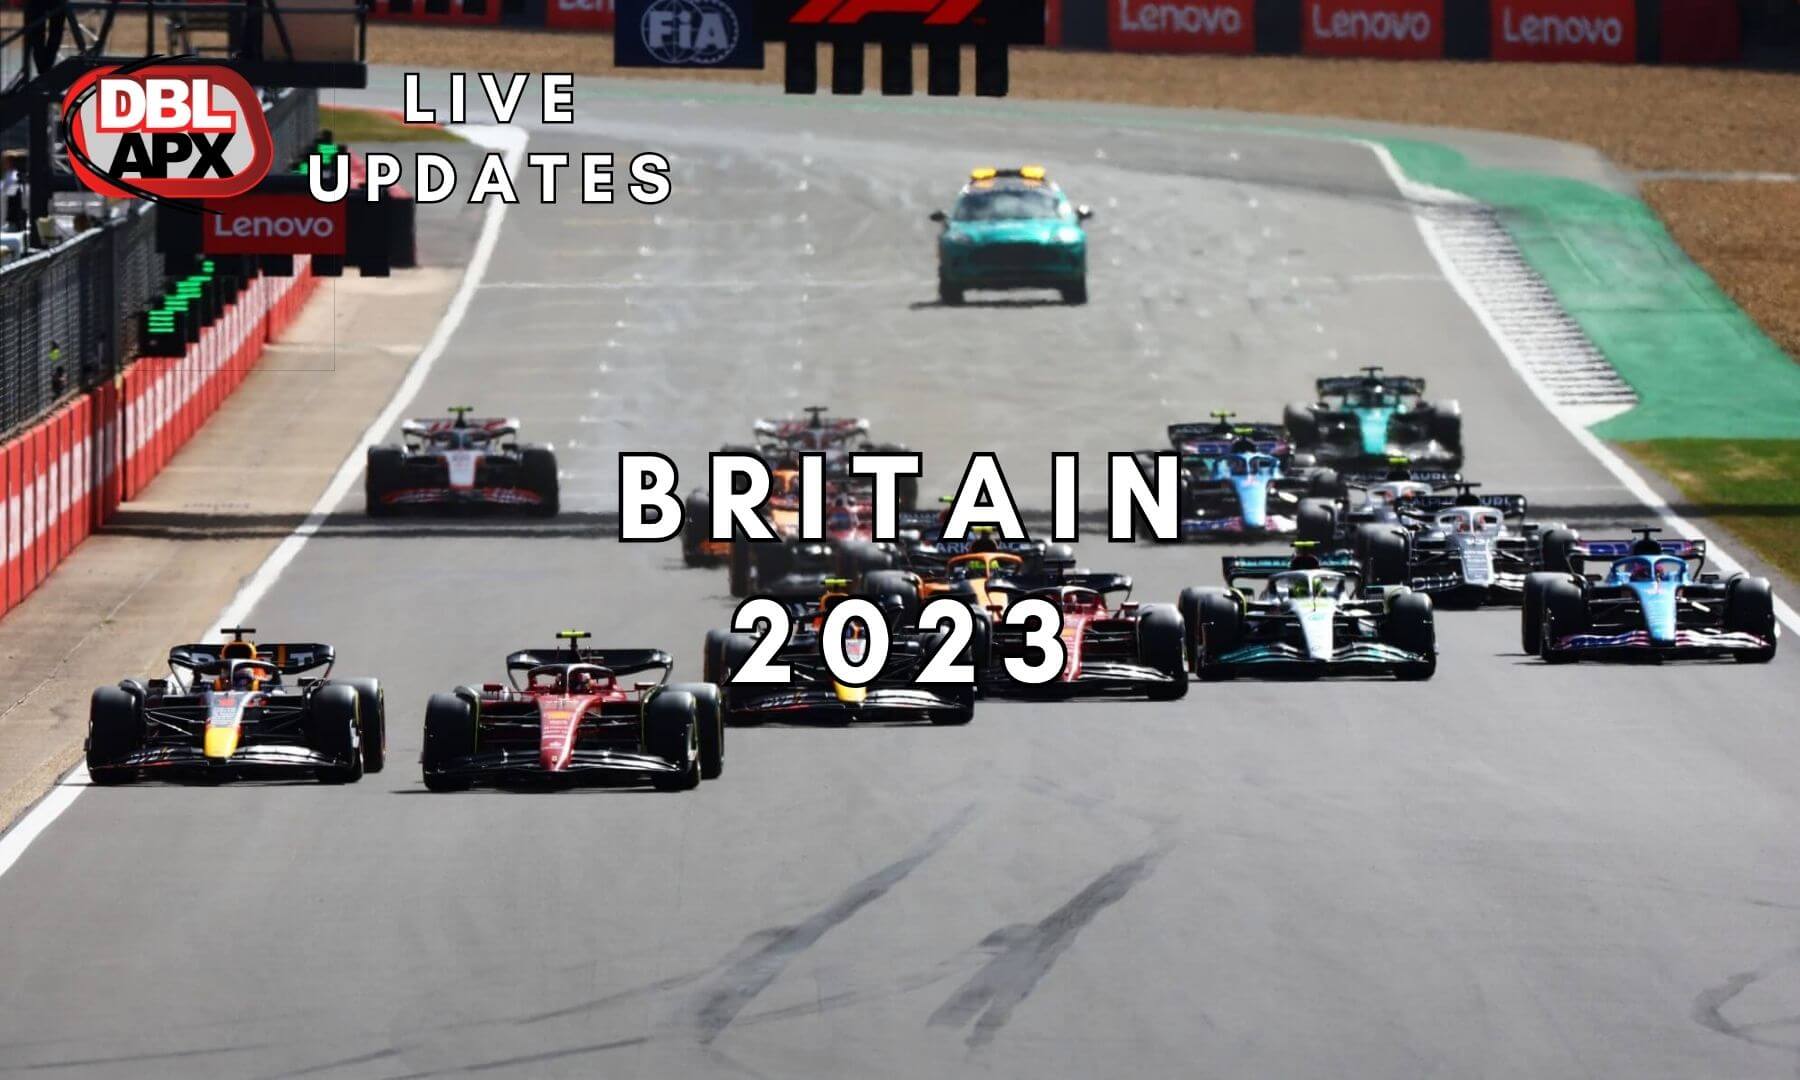 2023 Formula One British Grand Prix: How to watch, stream, preview